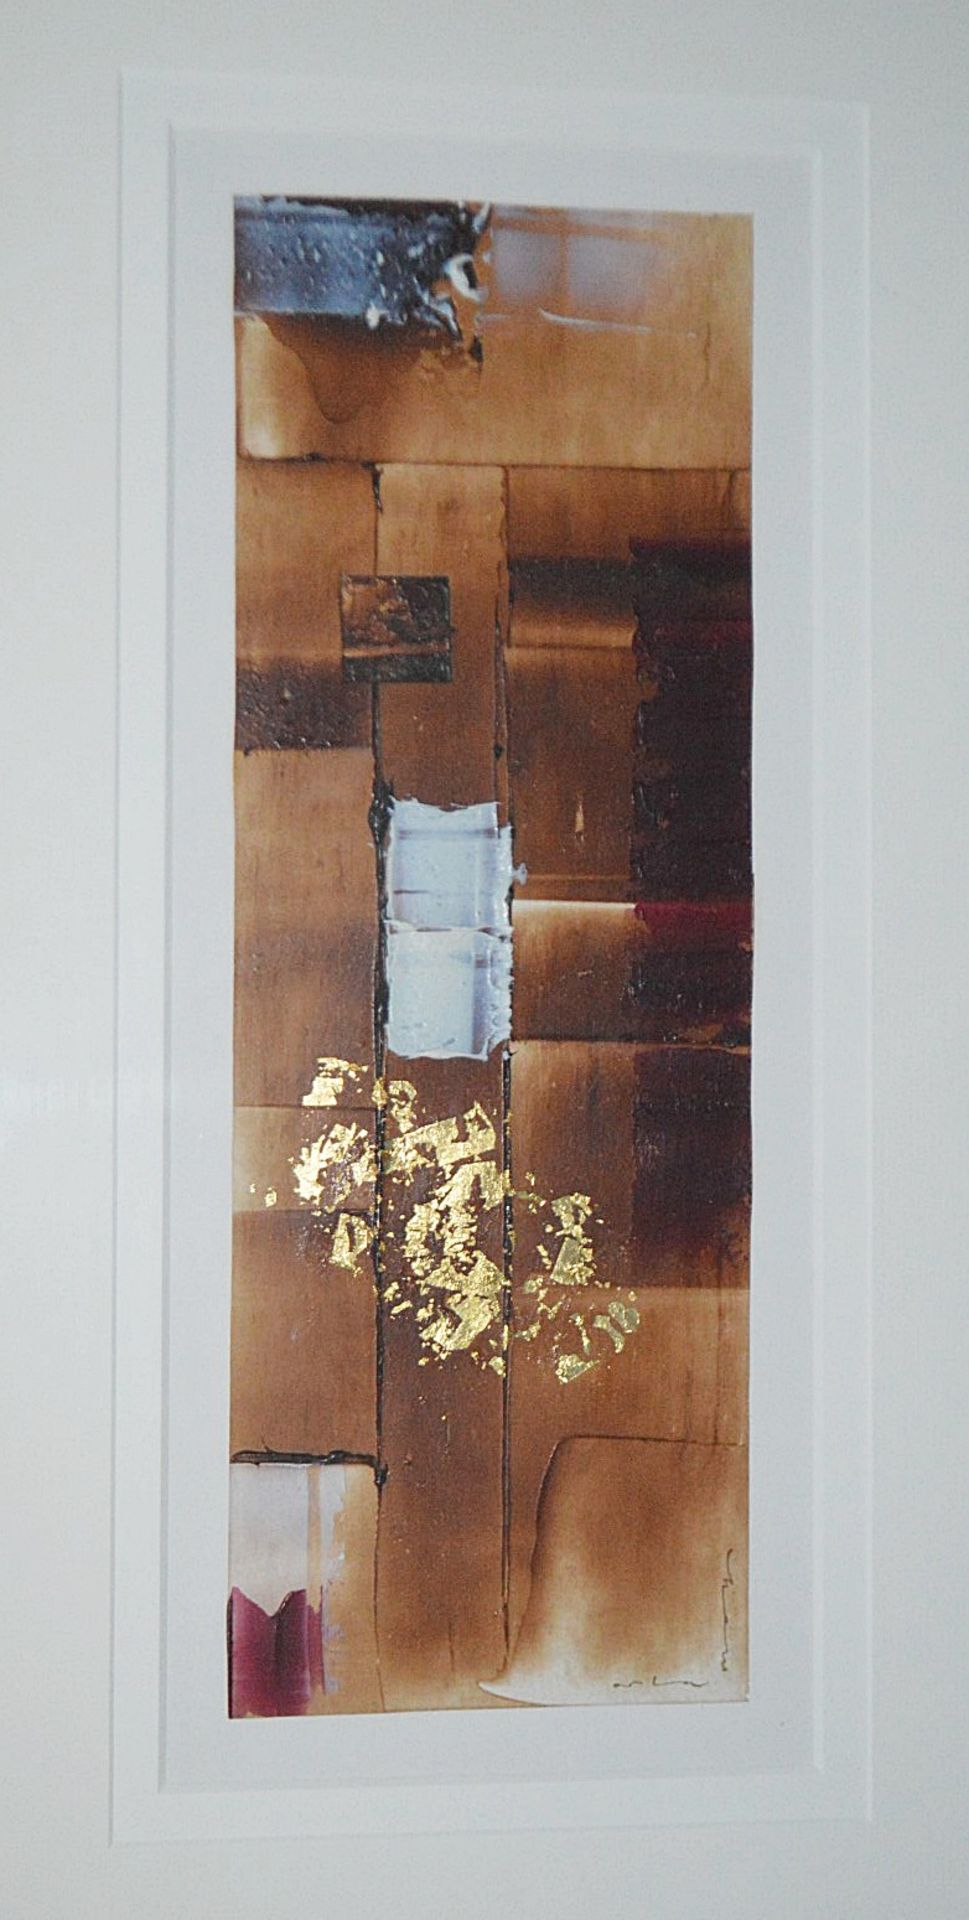 1 x Framed Original Mixed Media Oblong-Shaped Artwork By Orla May In Brown & Gold - Image 5 of 6